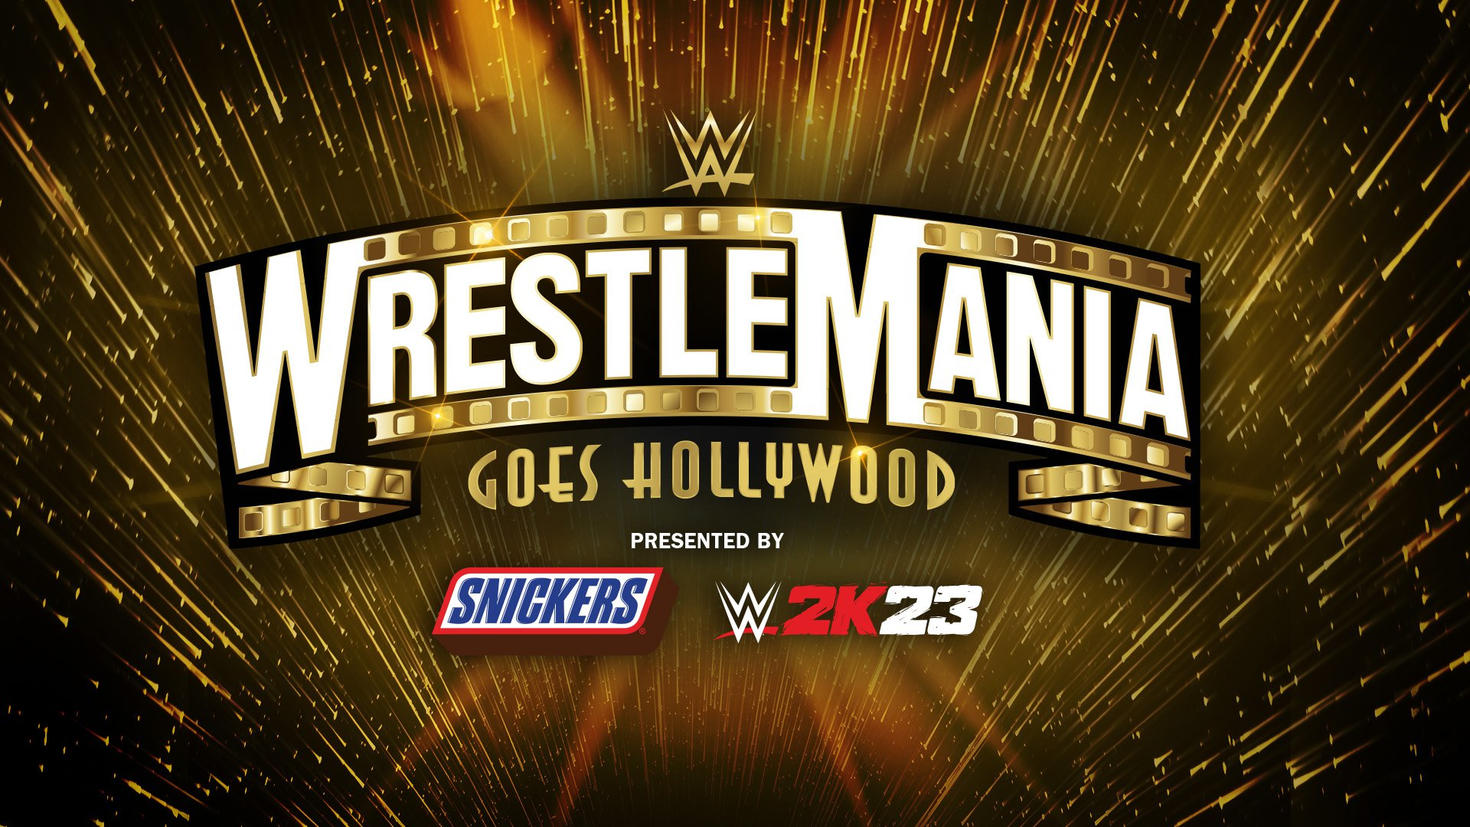 WWE WrestleMania, Take Two Interactive And Announced Today That And 2K23 Will Return As Joint Presenting Partners Of #WrestleMania, Which Takes Place Saturday, April And Sunday